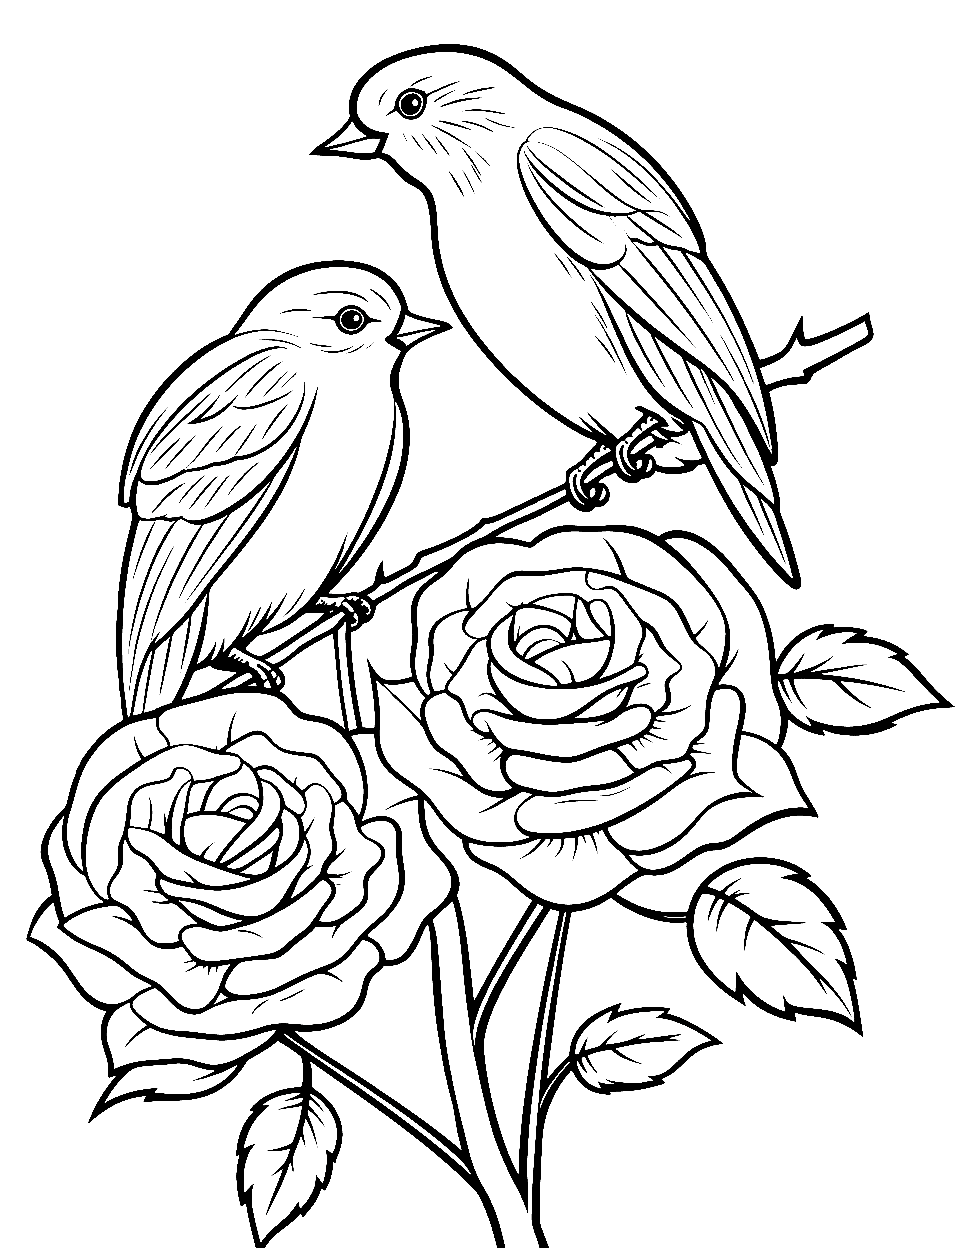 Lovebirds Perched on Rose Stem Coloring Page - Two lovebirds, sitting closely on a thorny rose stem, representing love amidst difficulties.